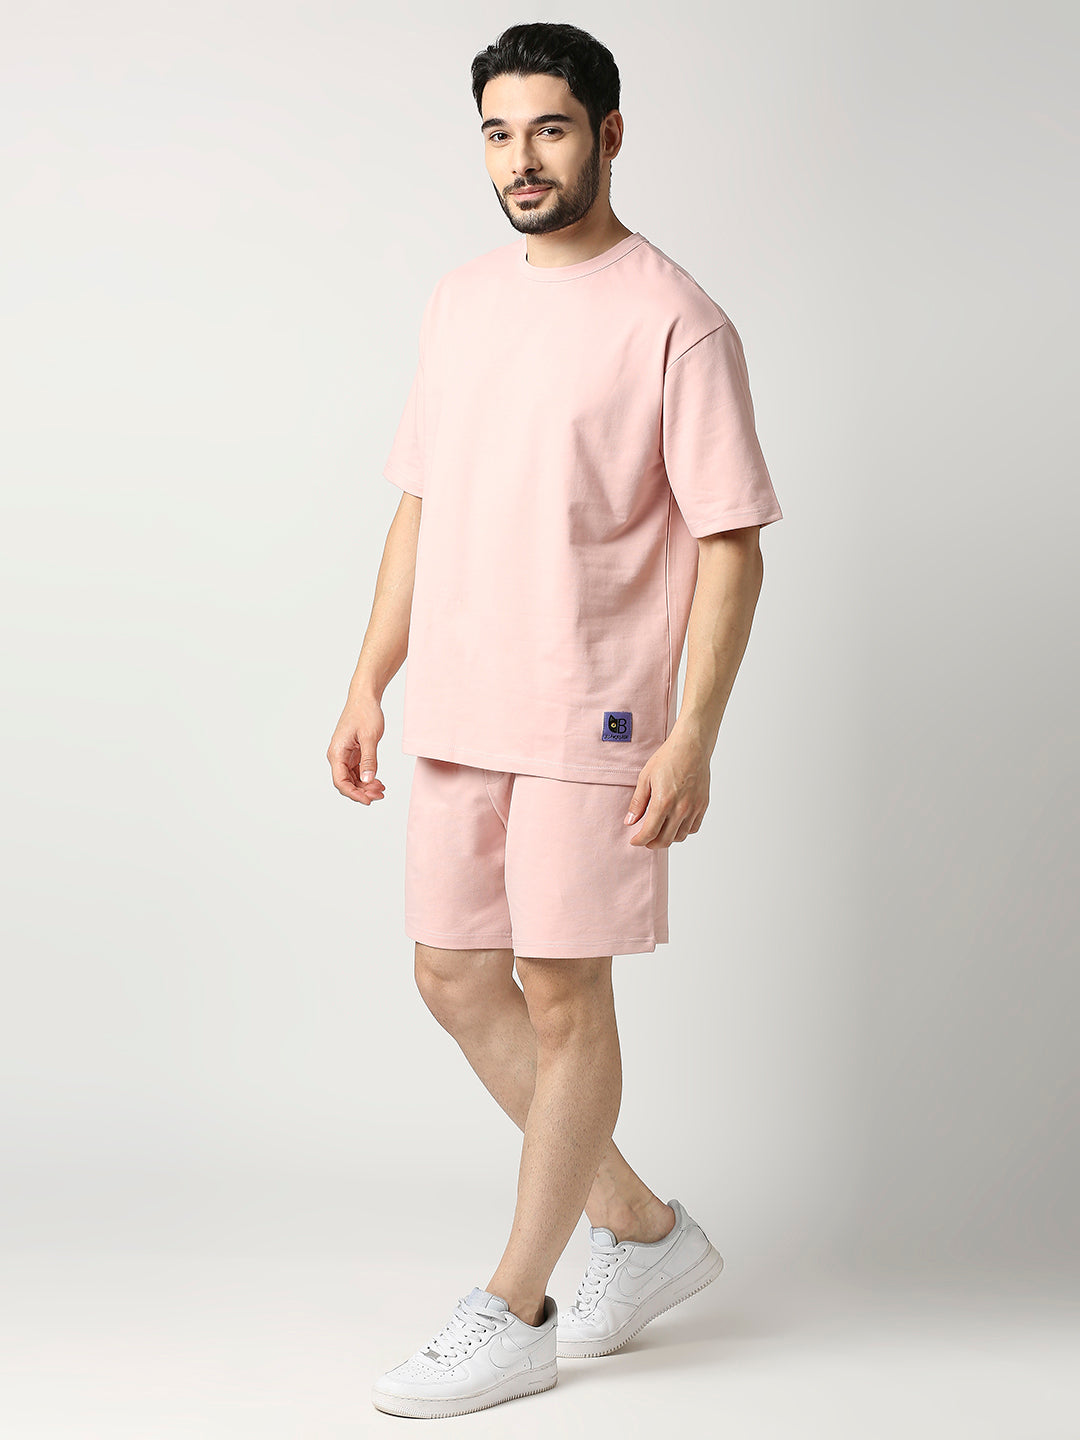 Buy Blamblack Solid Pink Co-ord Set with short.